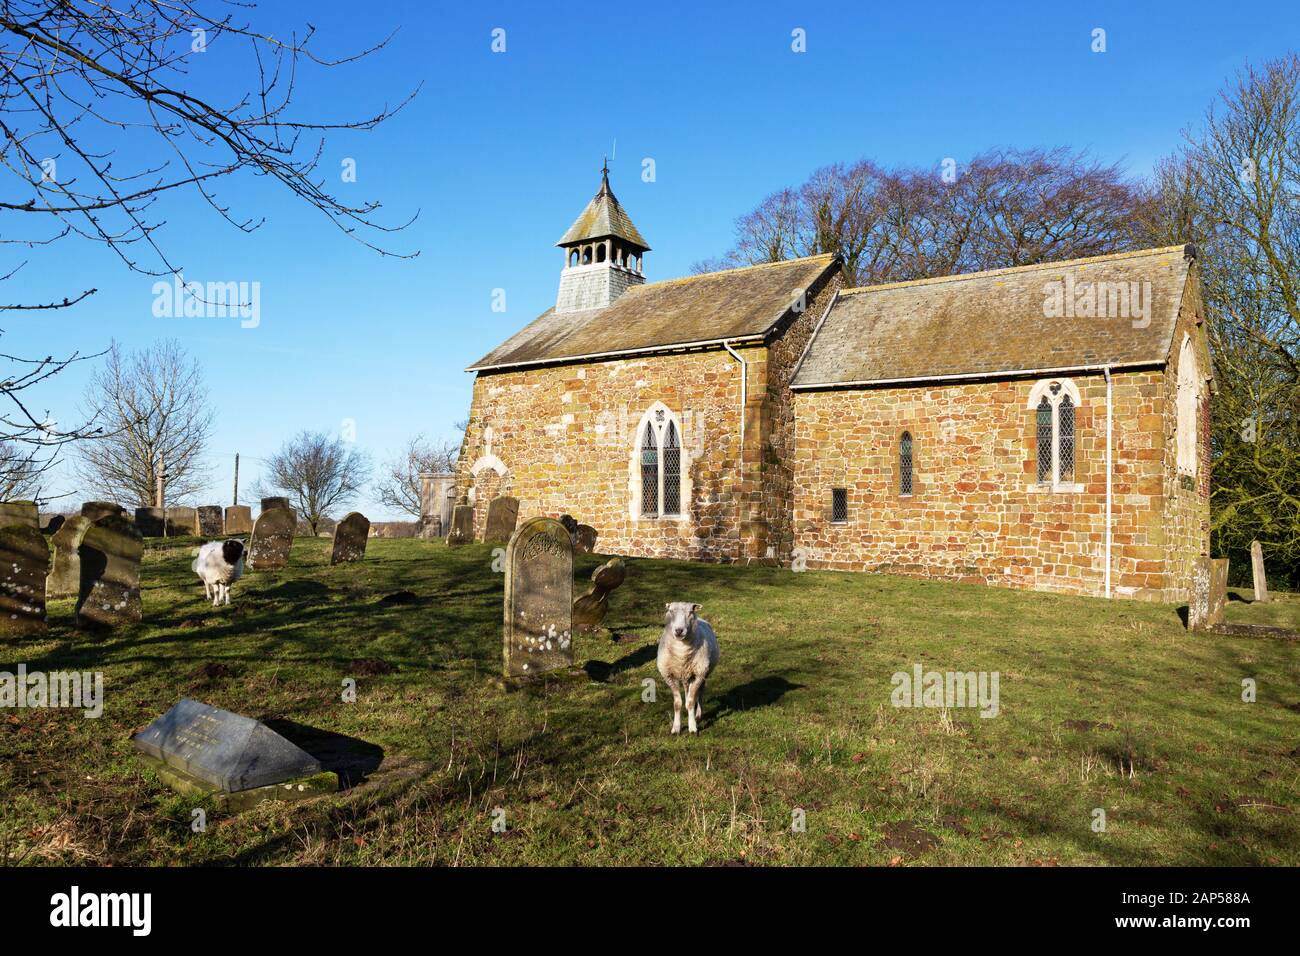 Old english churches; St Peters Church, Lusby Lincolnshire, an 11th century norman church with sheep grazing in the churchyard, Lusby, Lincolnshire UK Stock Photo